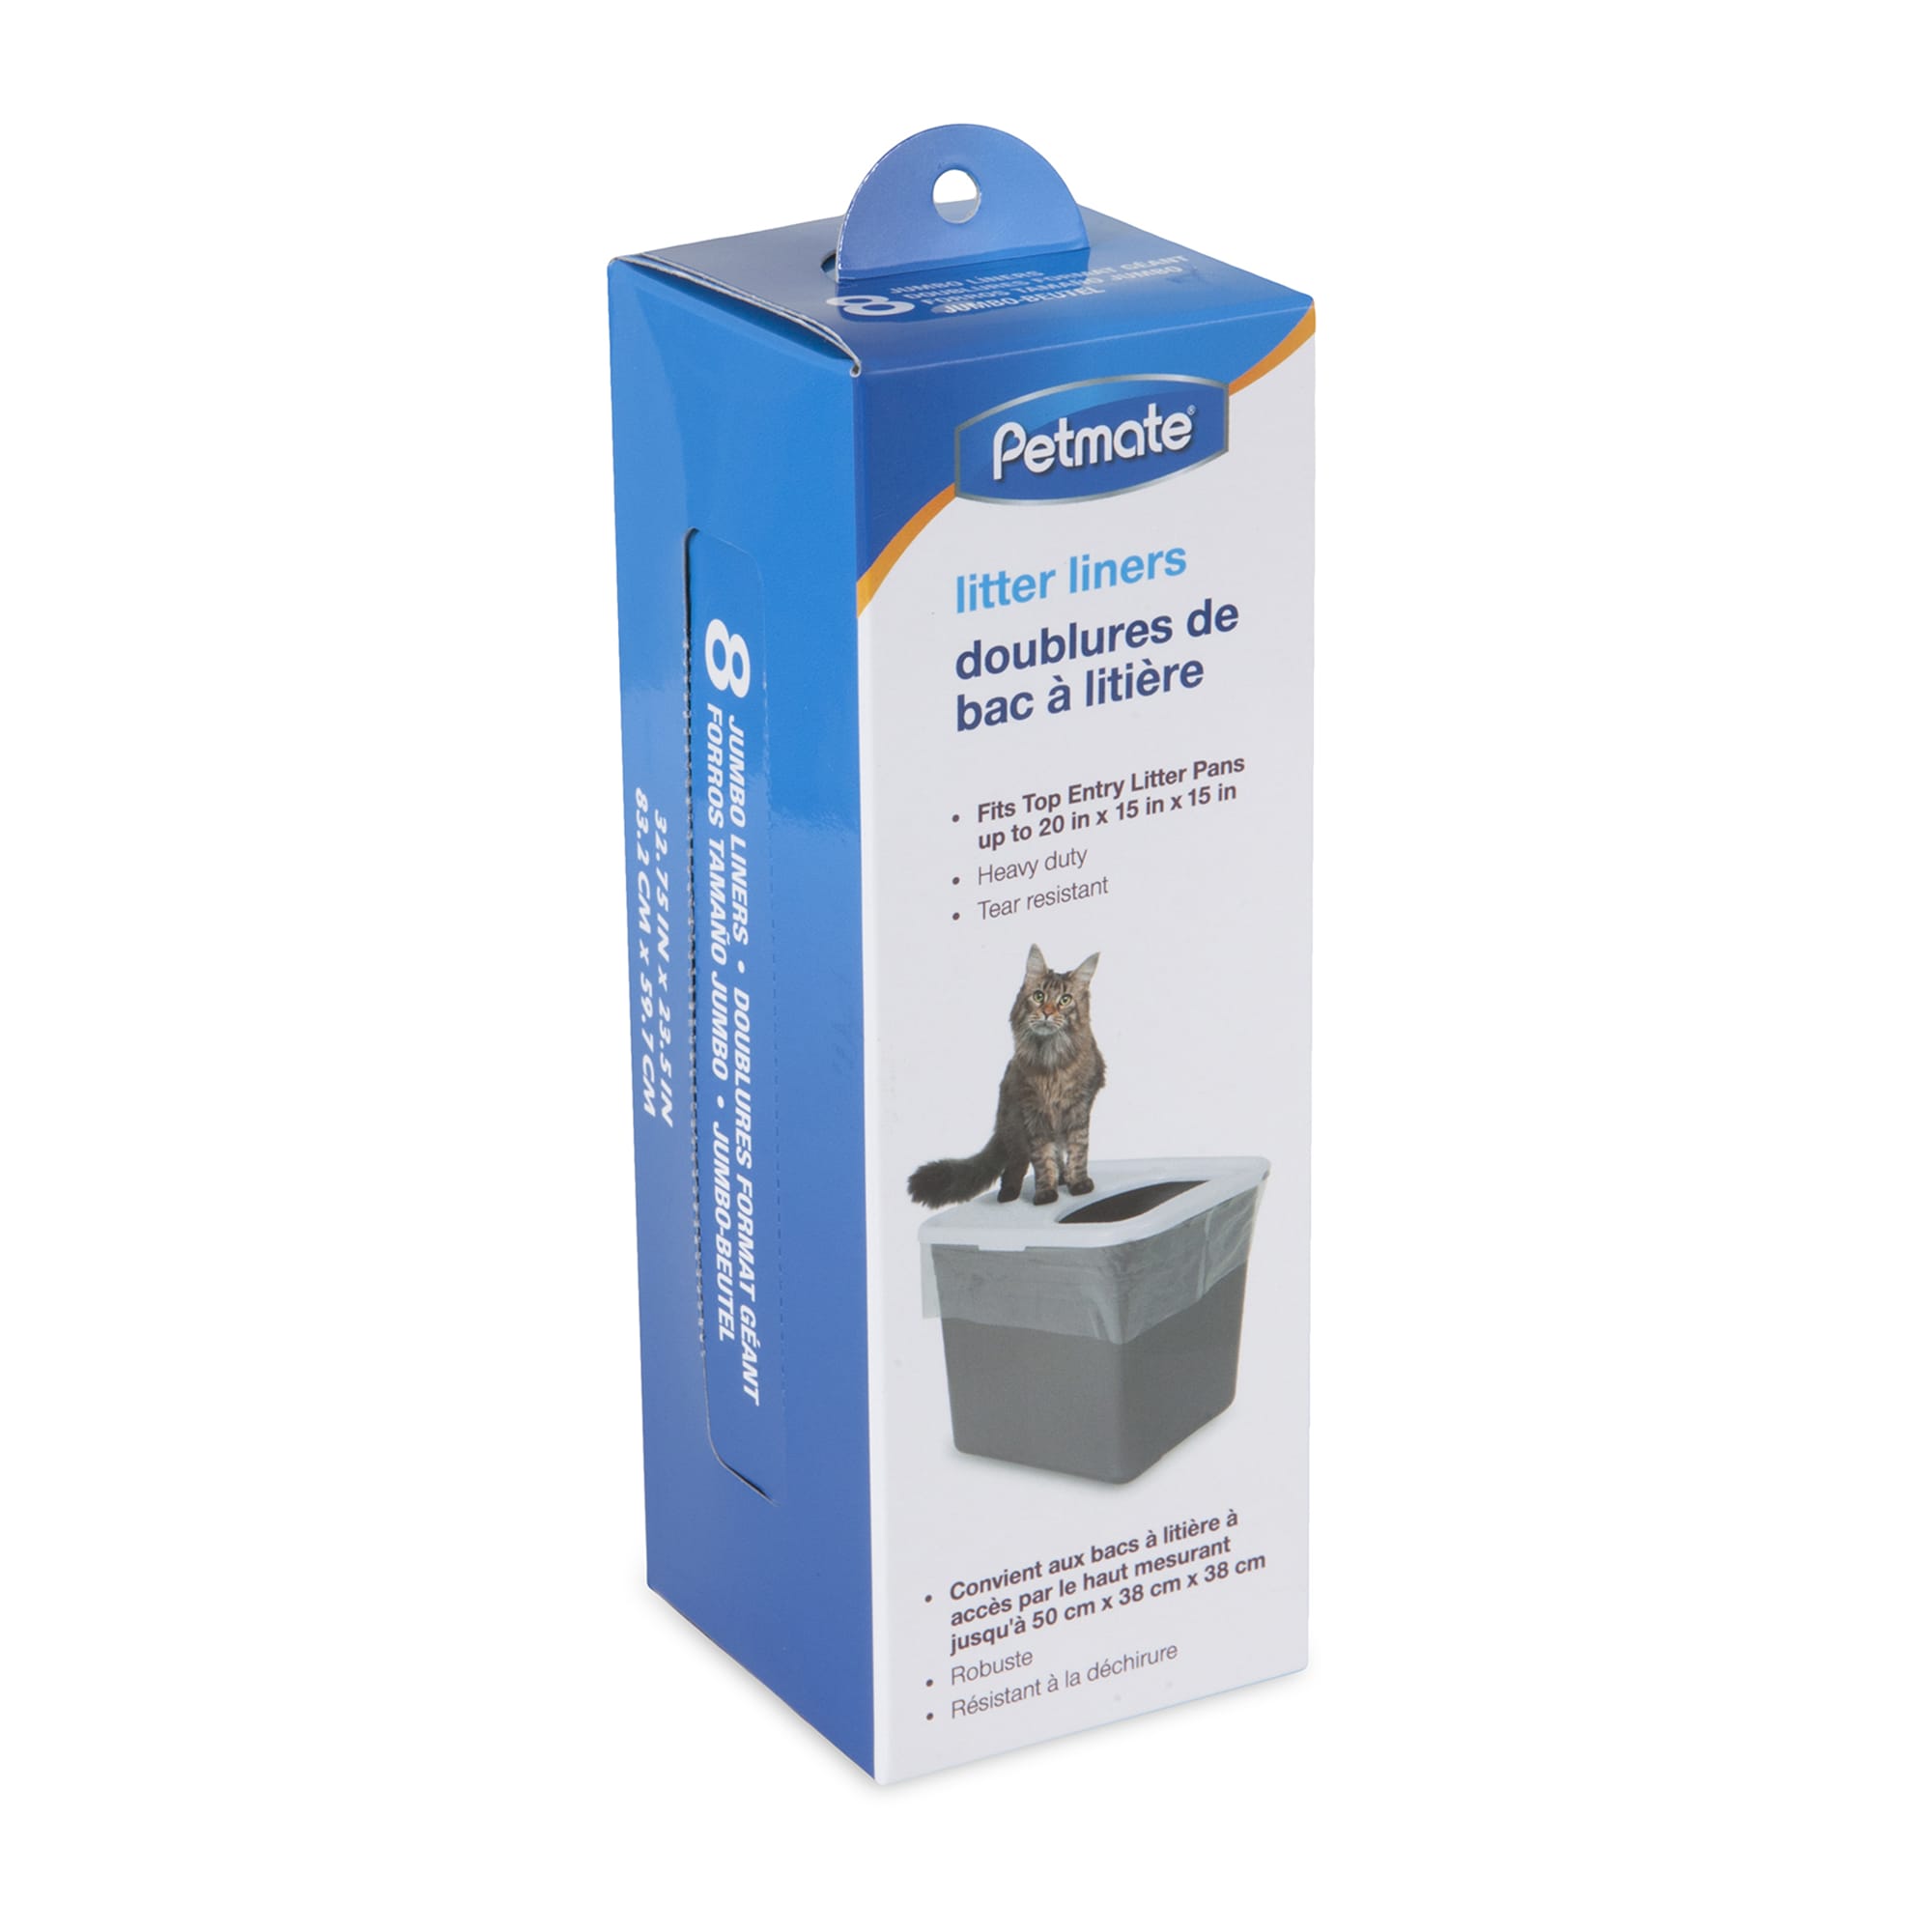 Petmate Top Entry Litter Pan Liners for Cat, Count of 8 Petco